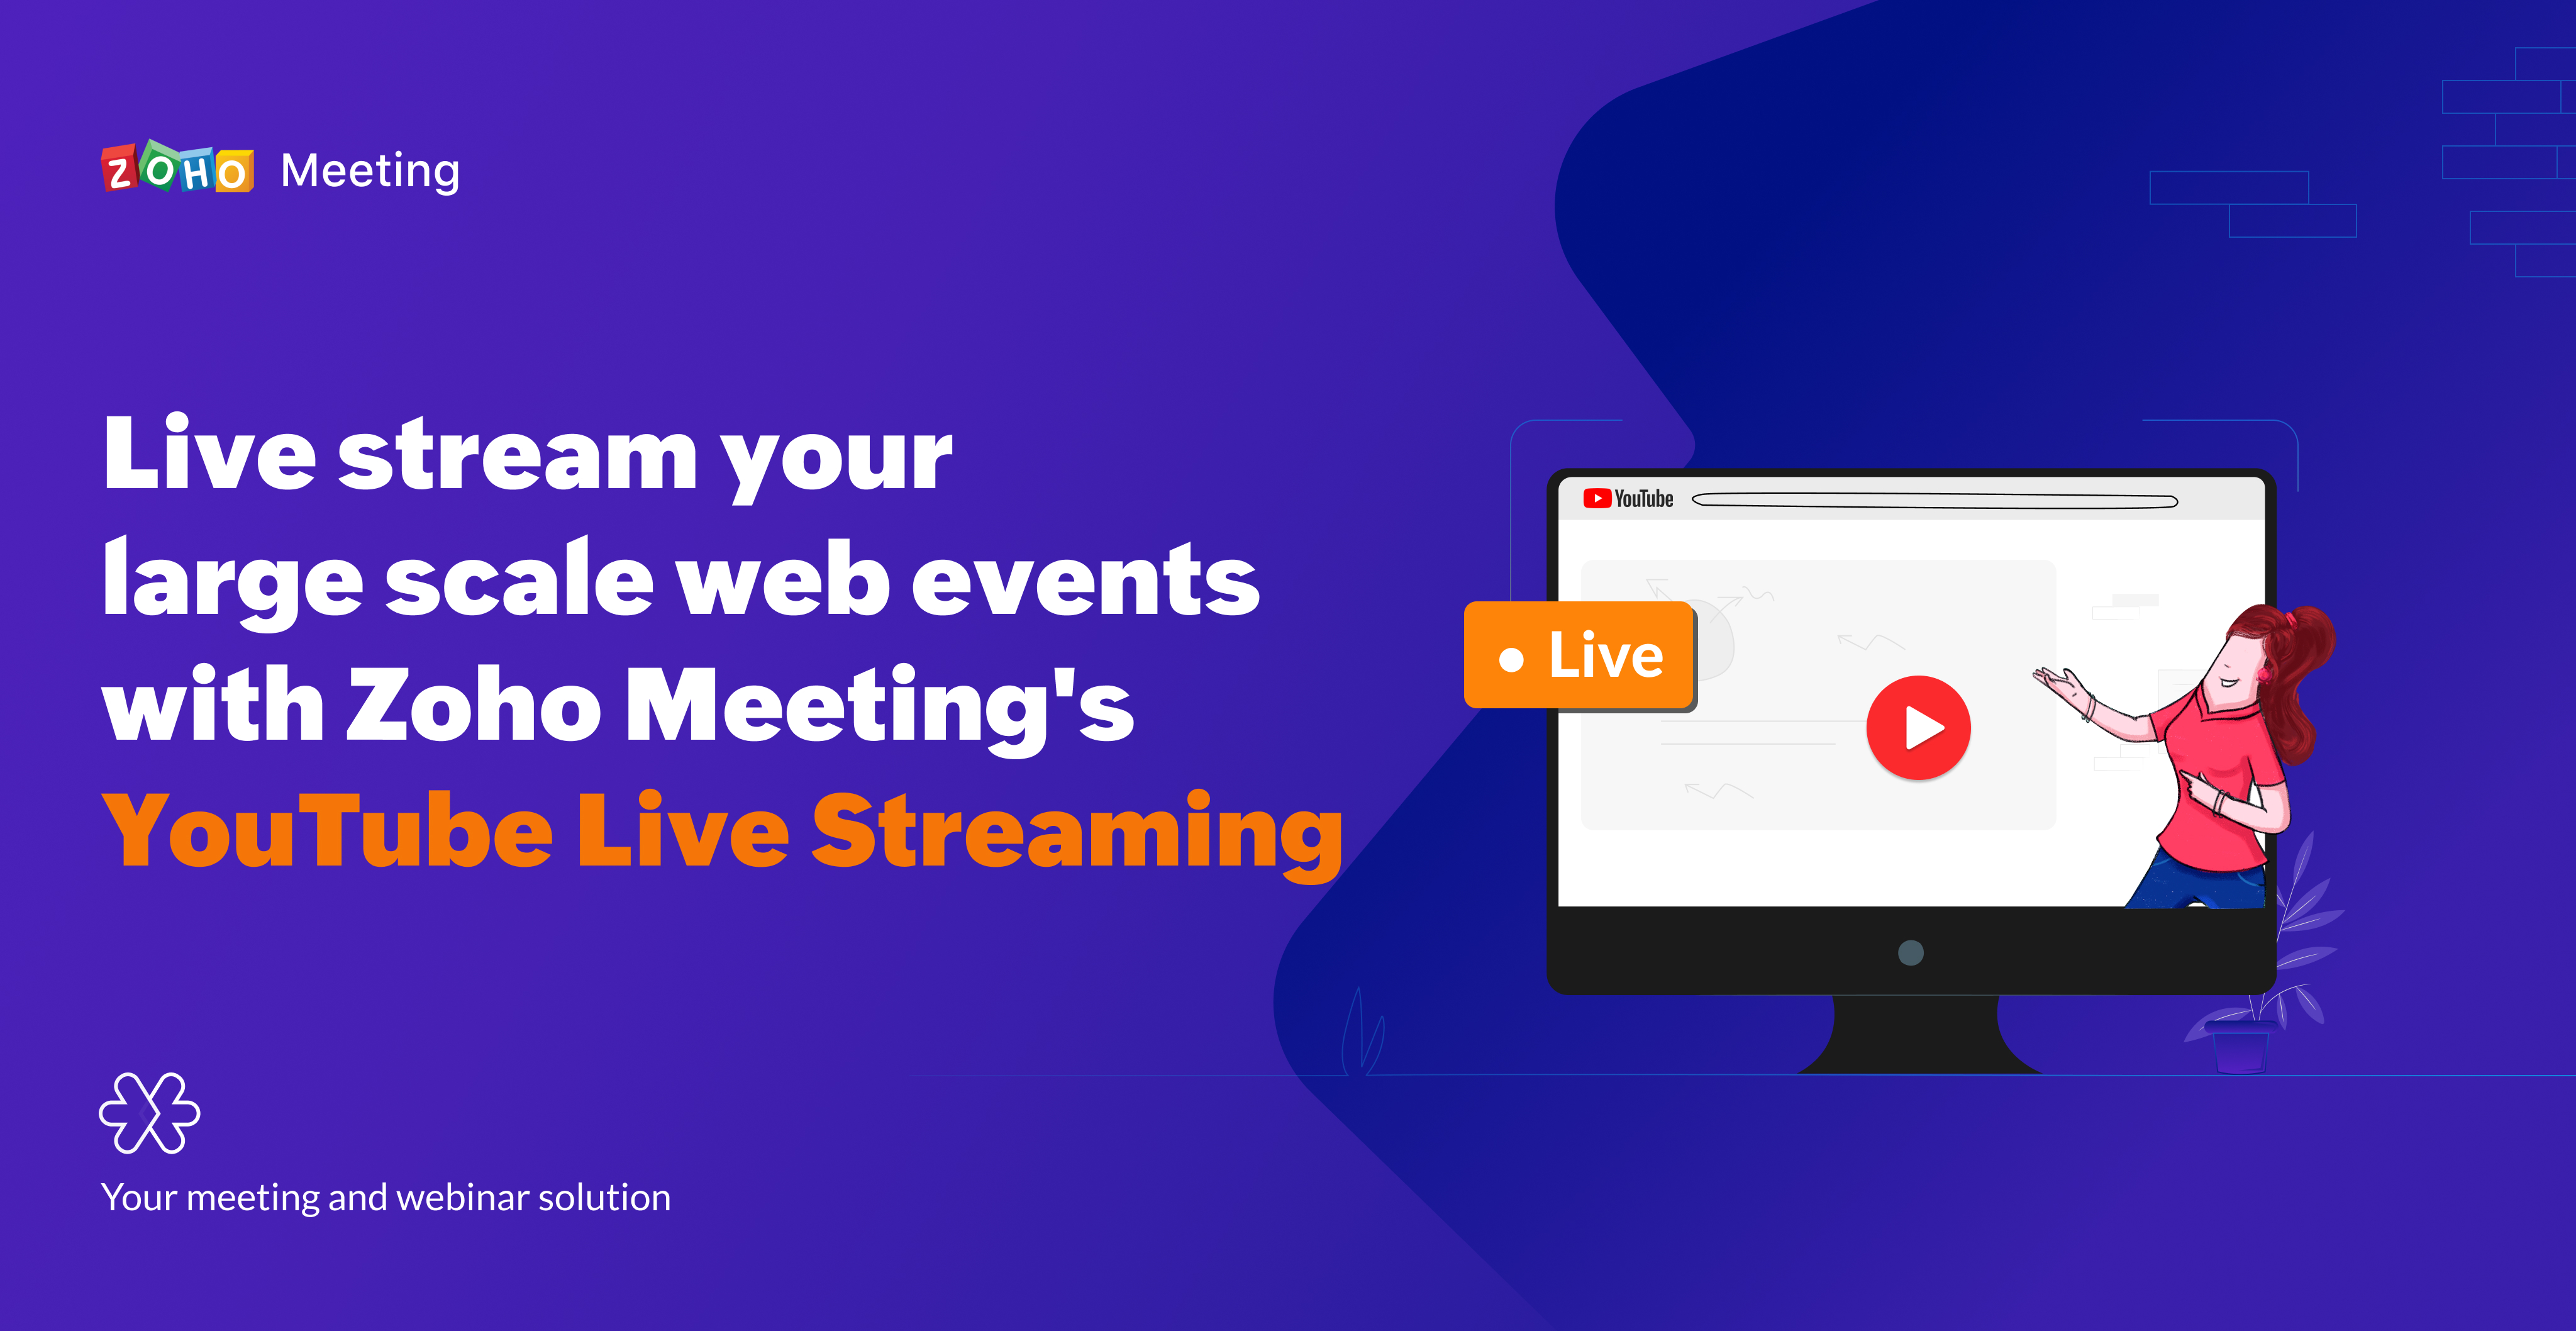 Expand your global outreach with Zoho Meeting's all-new YouTube Live Streaming